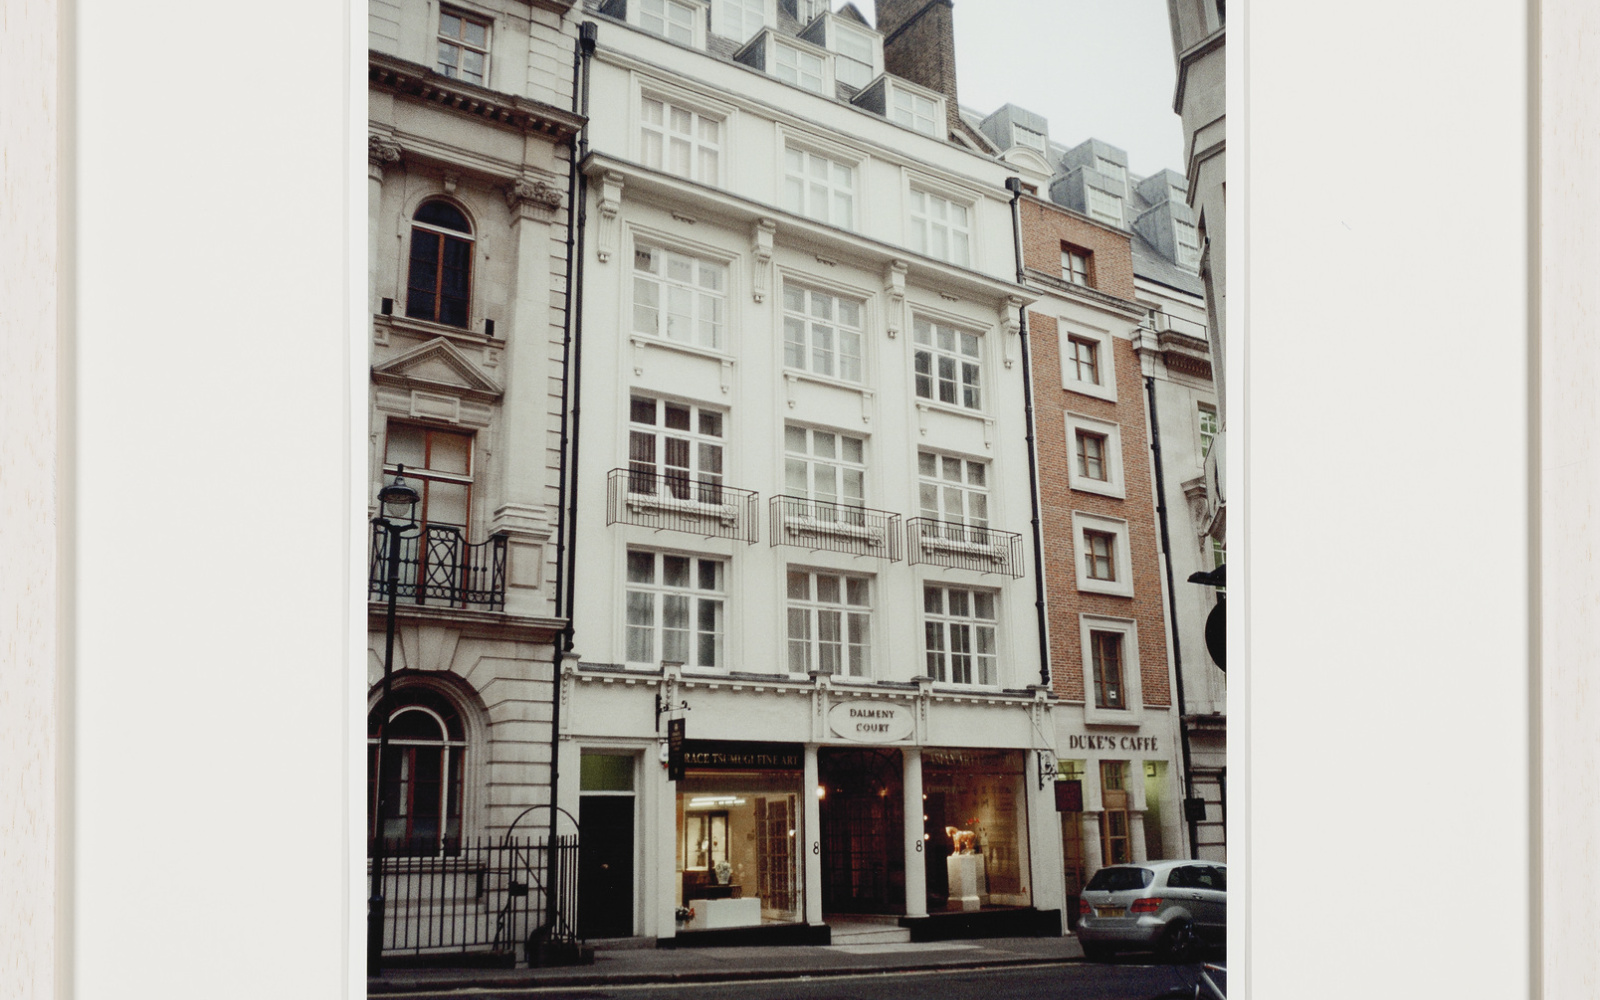 Dalmeney Court, 8 Duke Street (St. James’s), Mayfair, London. That’s where Burroughs used to live between 1965 and 1974.